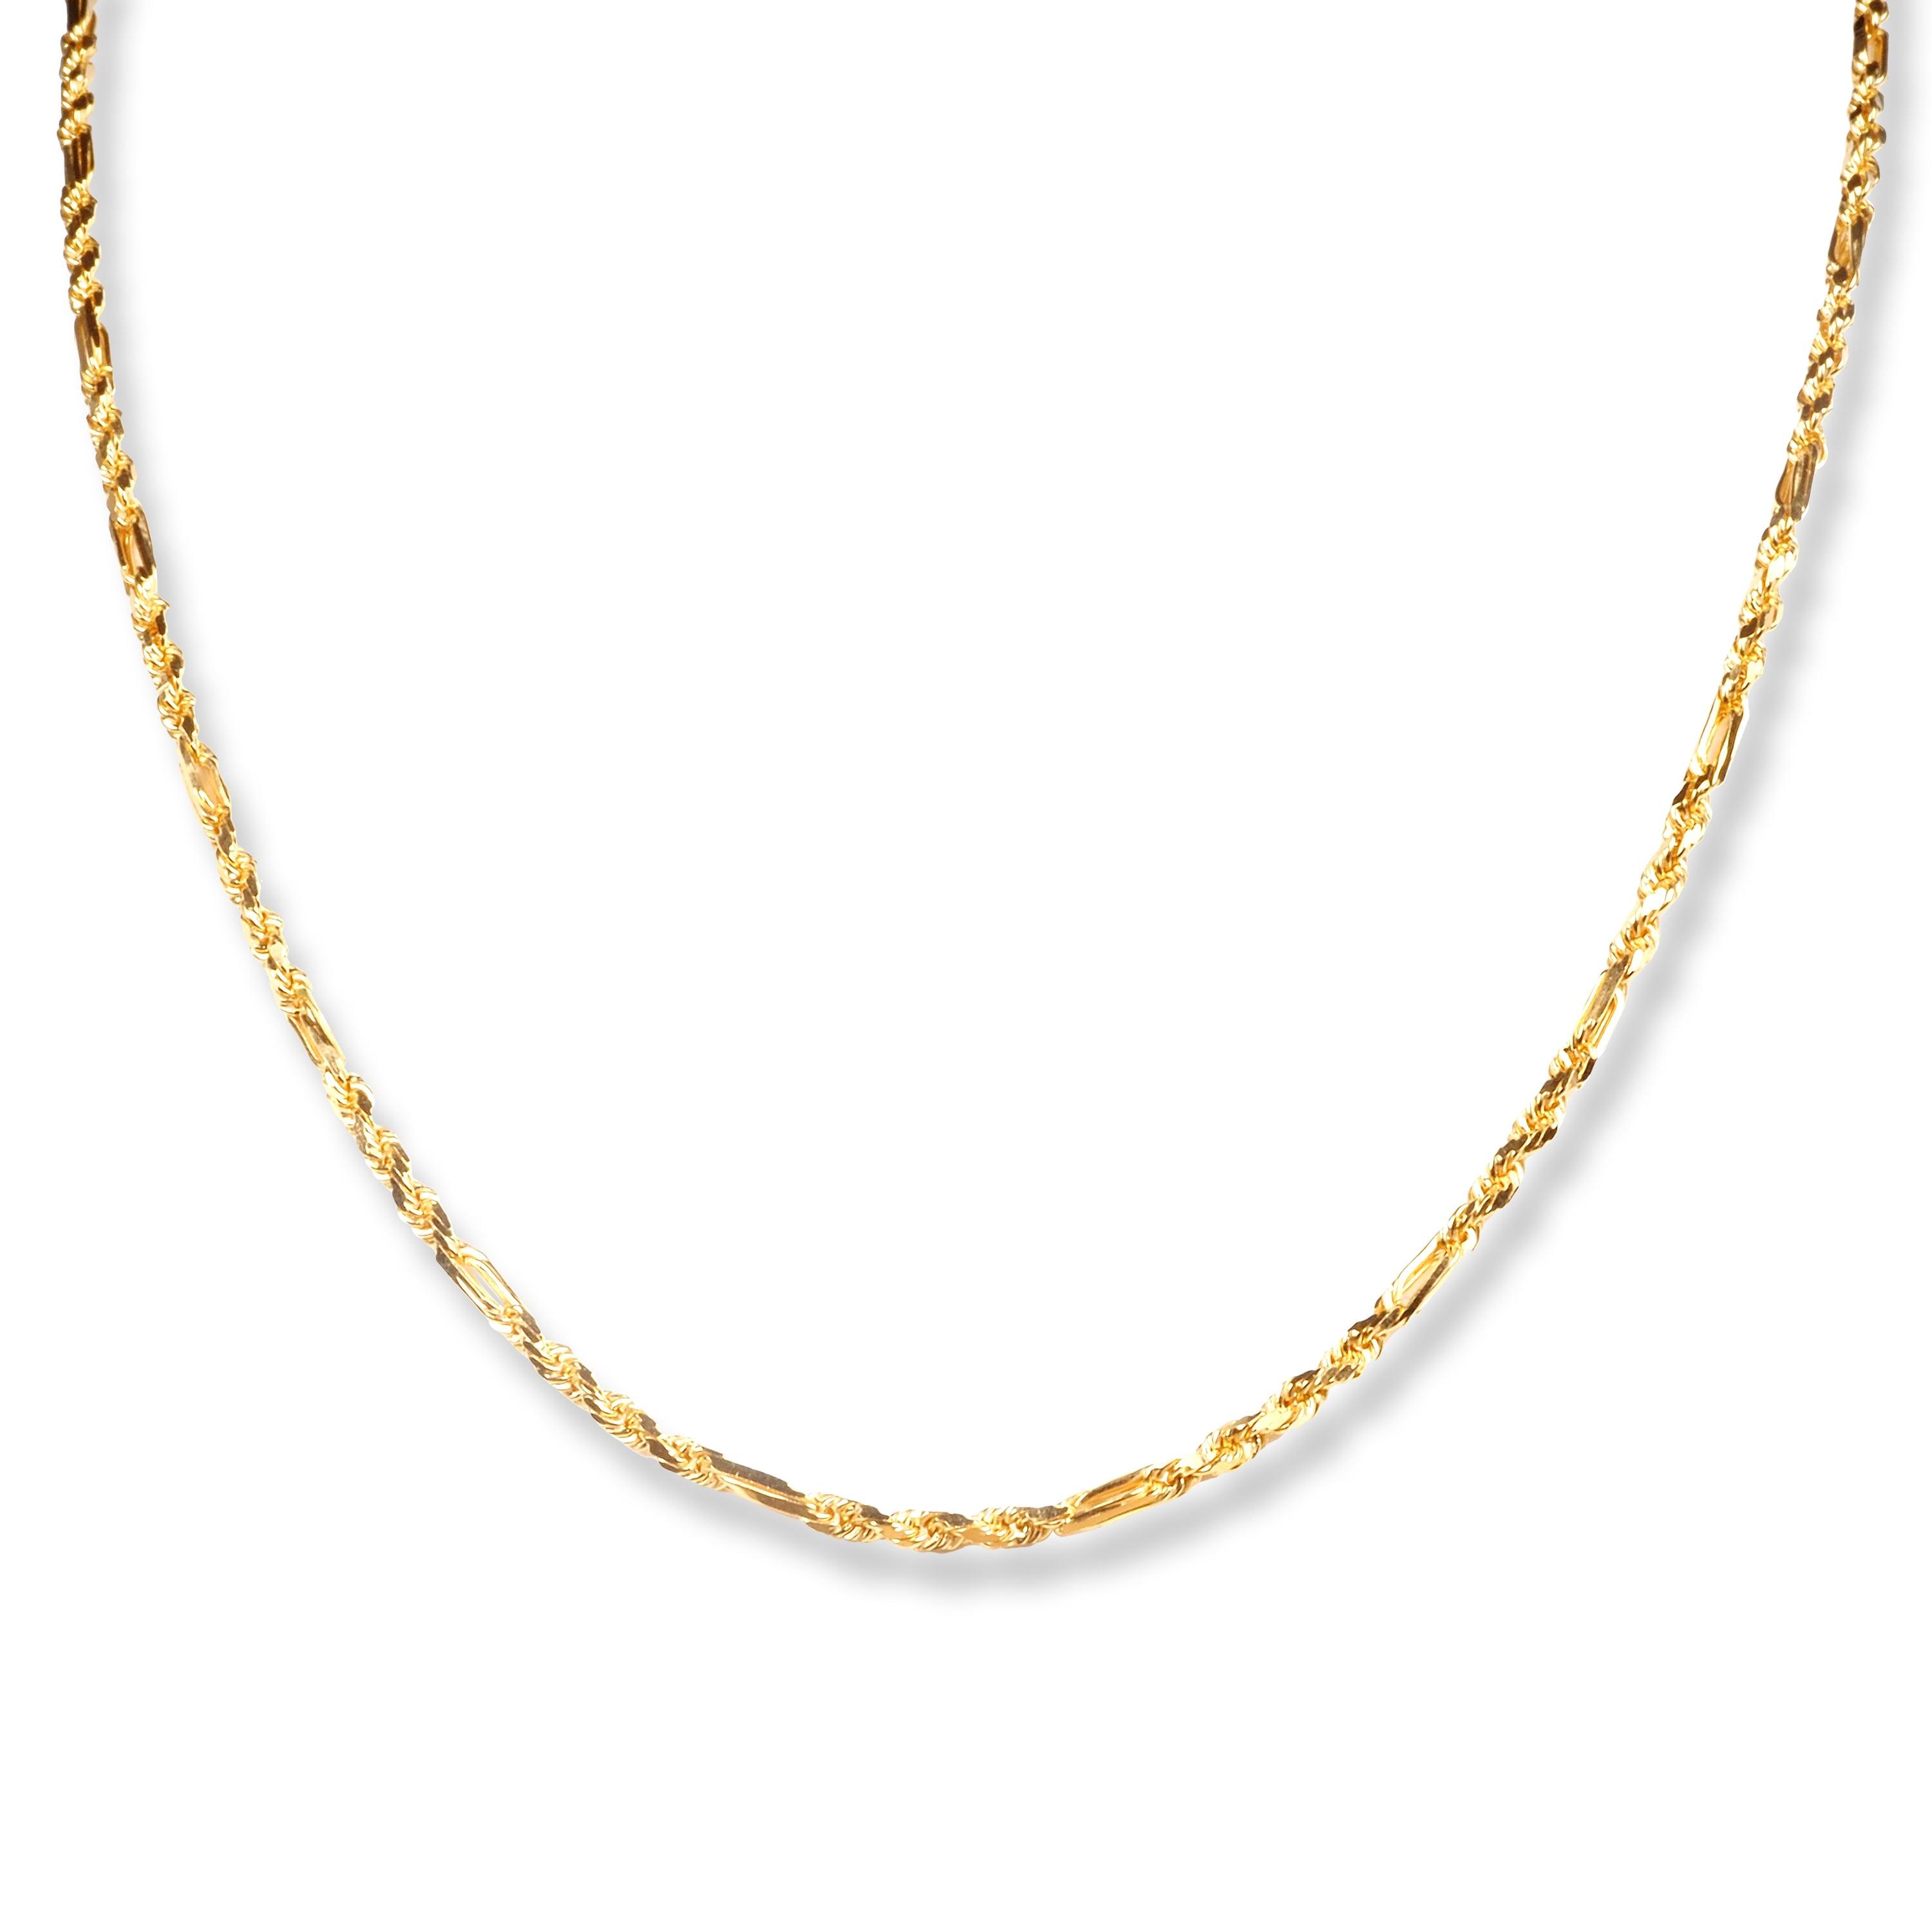 22ct Gold Fancy Rope Chain with Lobster Clasp C-7139 - Minar Jewellers